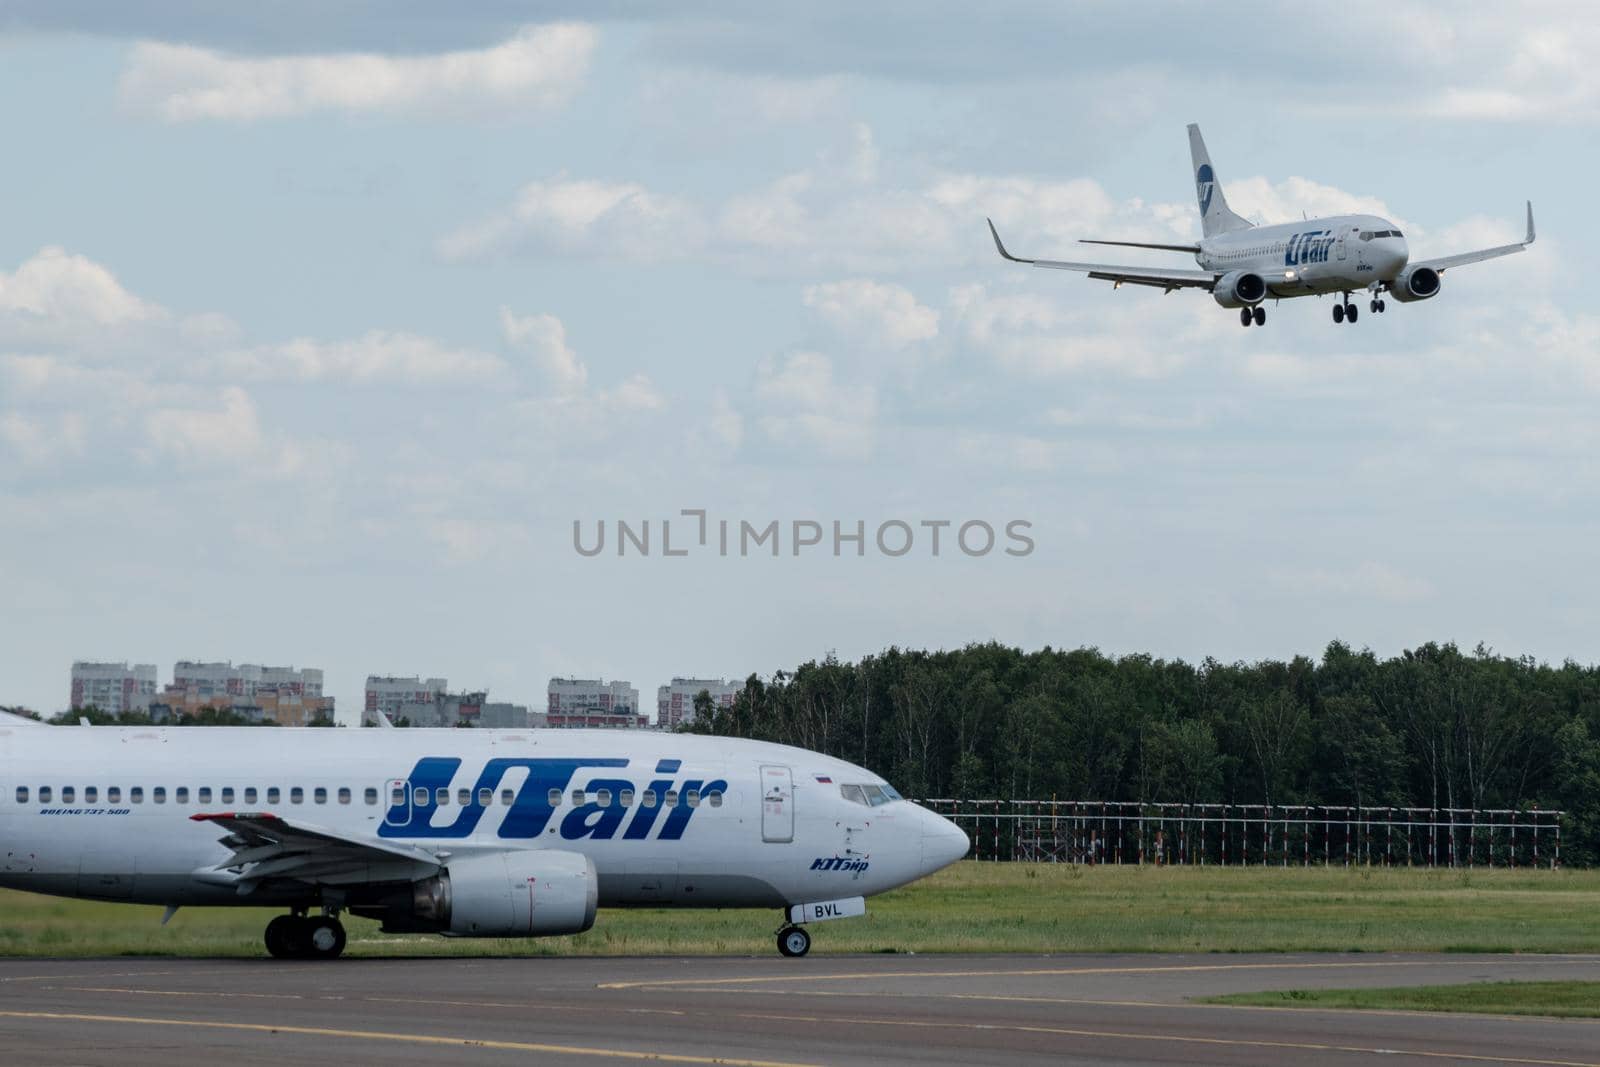 Airplane at the international airport by fifg